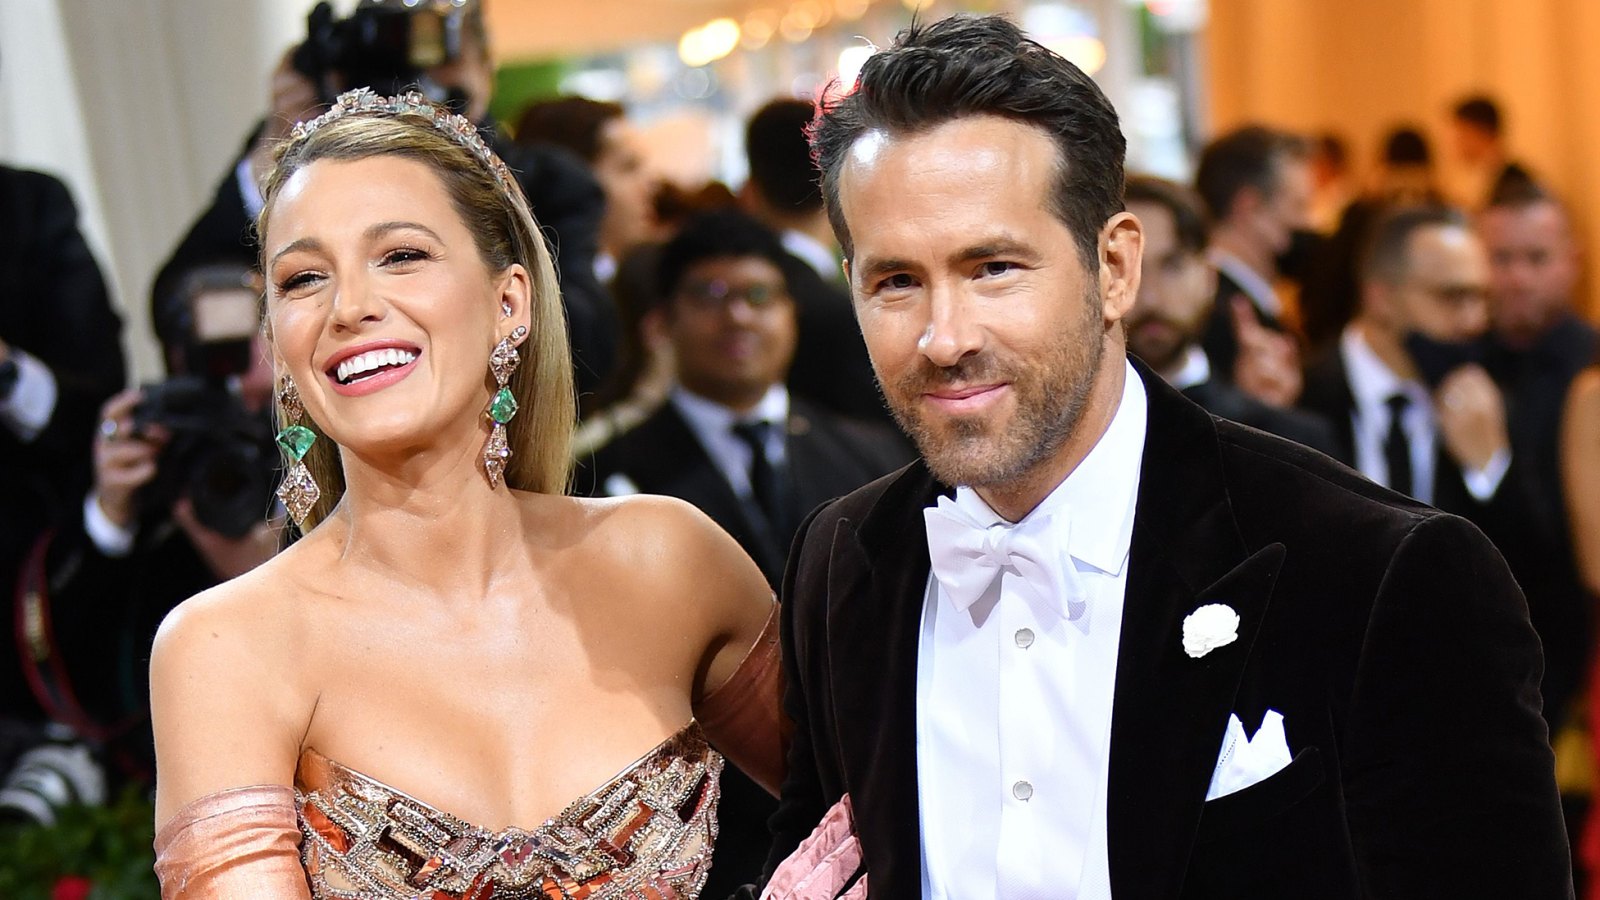 Pregnant Blake Lively and Ryan Reynolds’ 3 Daughters ‘Can’t Wait’ for Baby No. 4